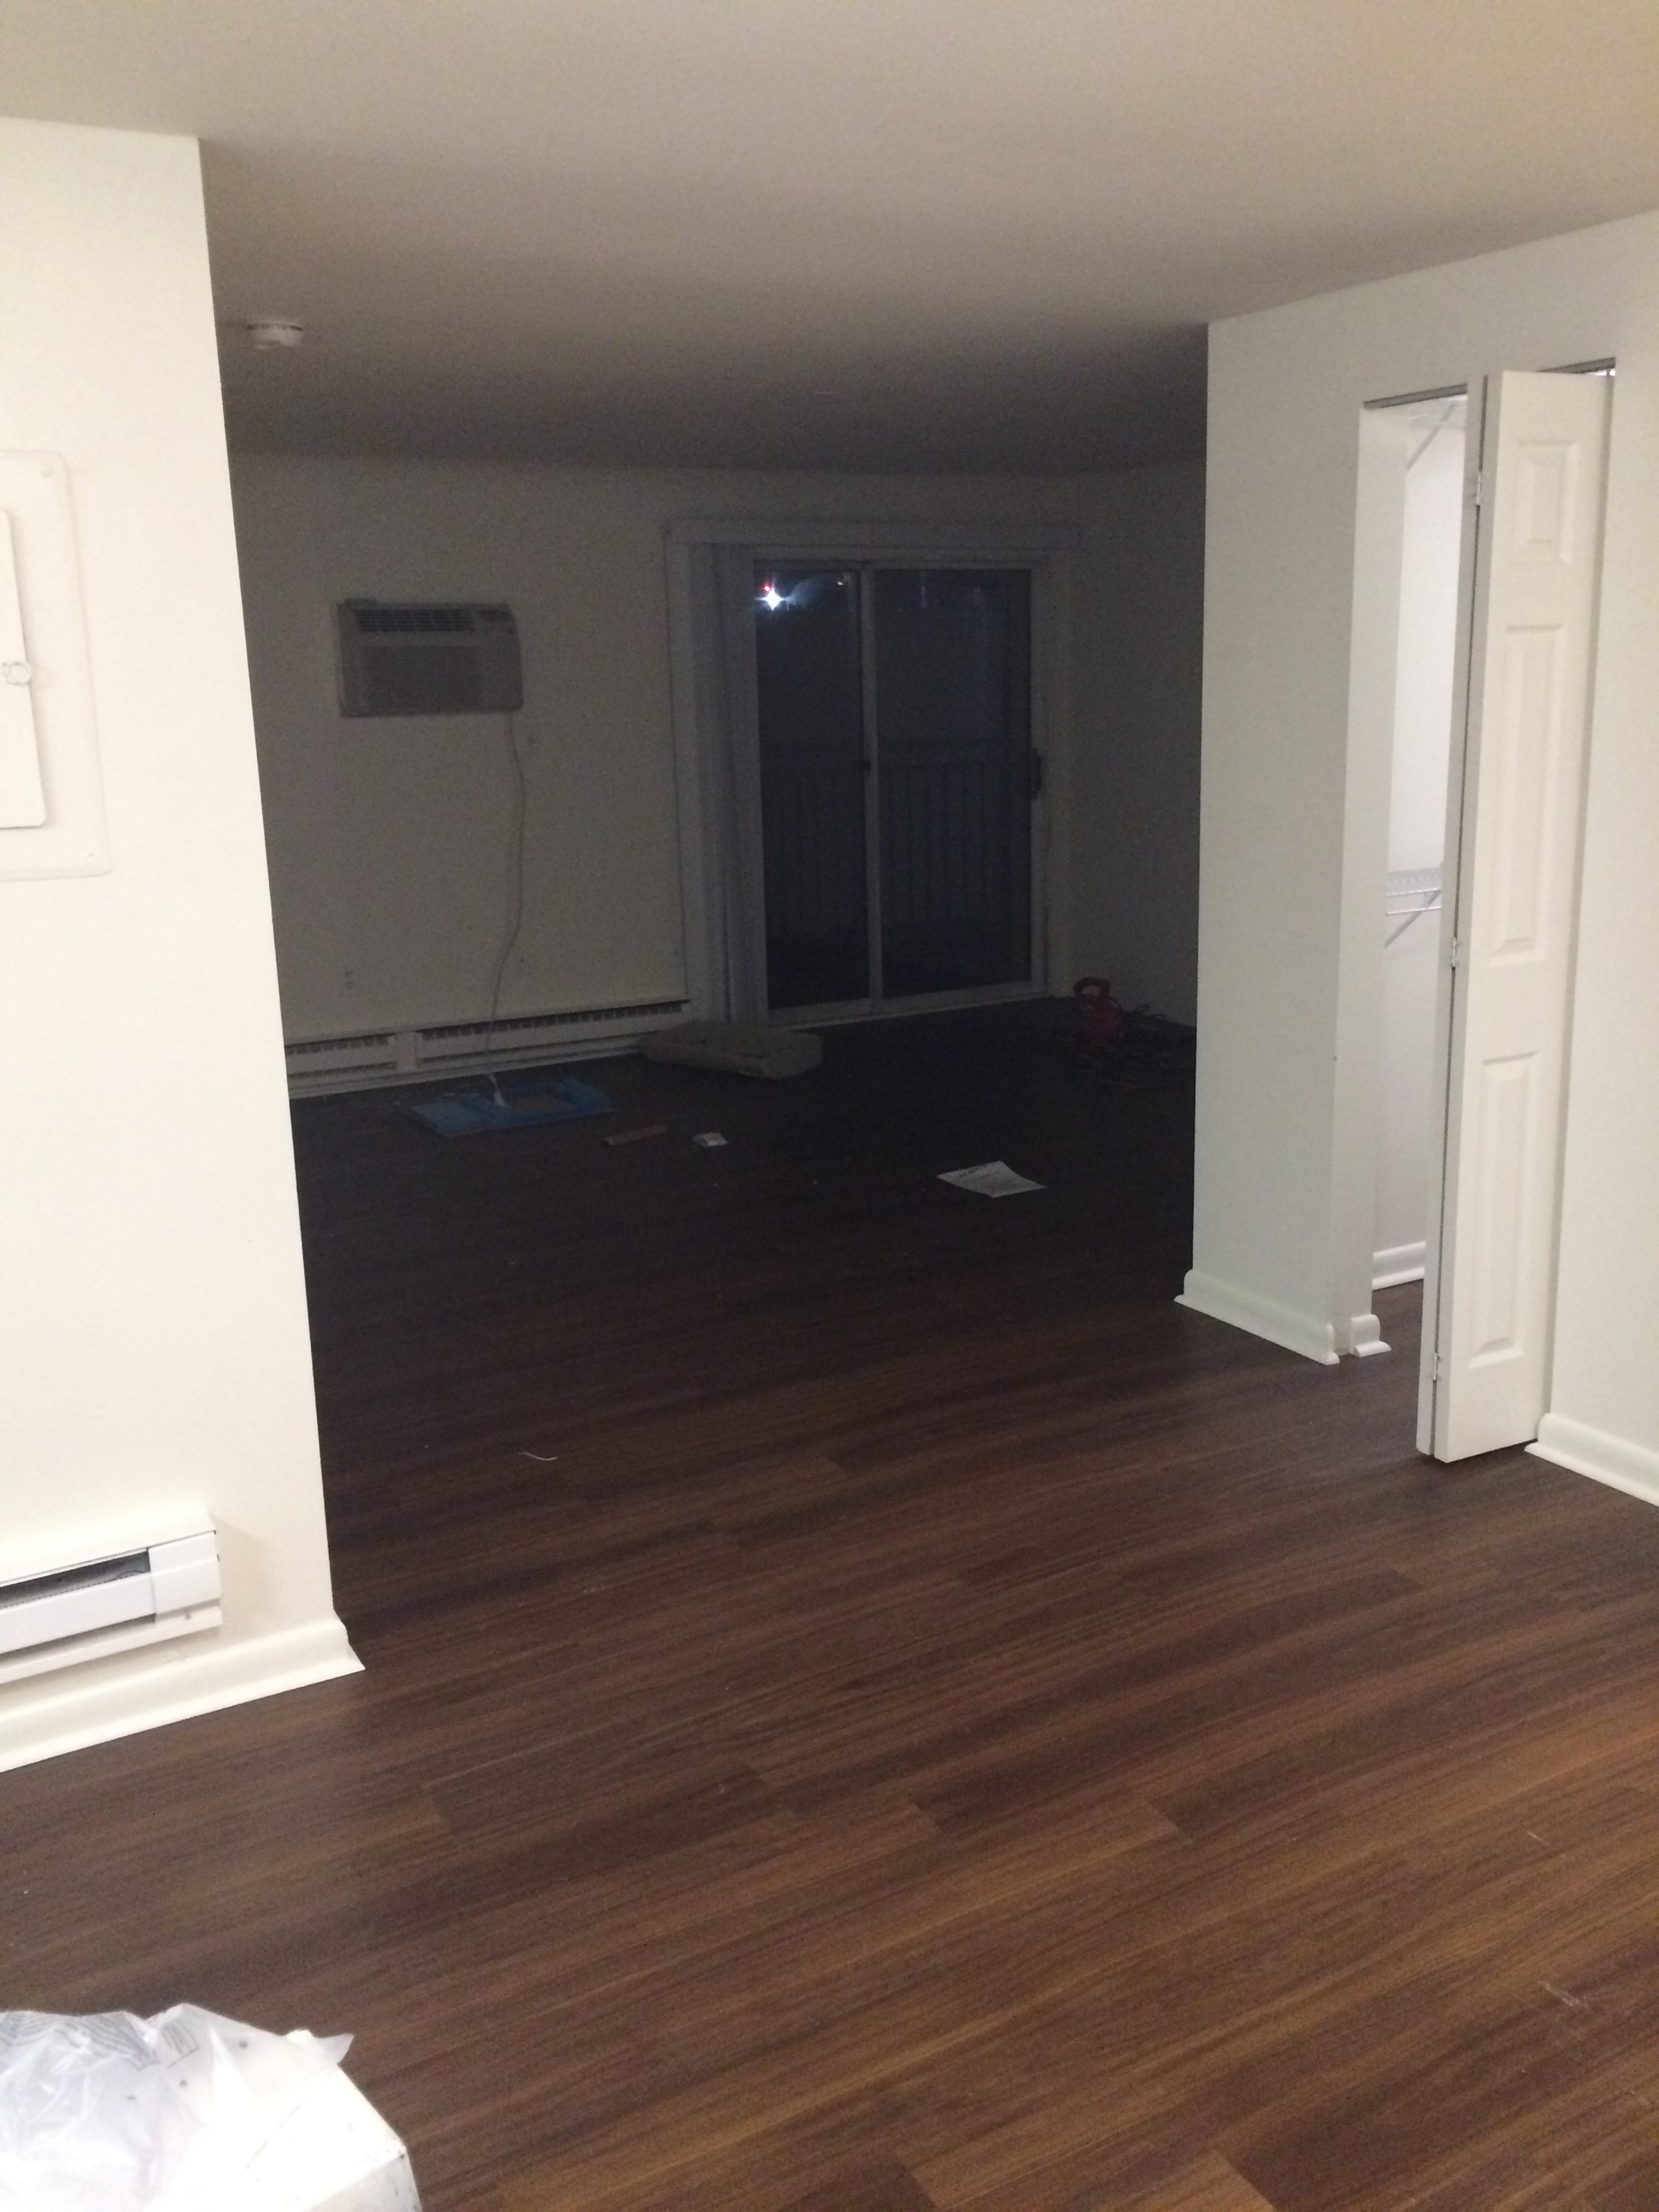 1 Bedroom Apartment To Rent In Taunton Ma Single Bedroom